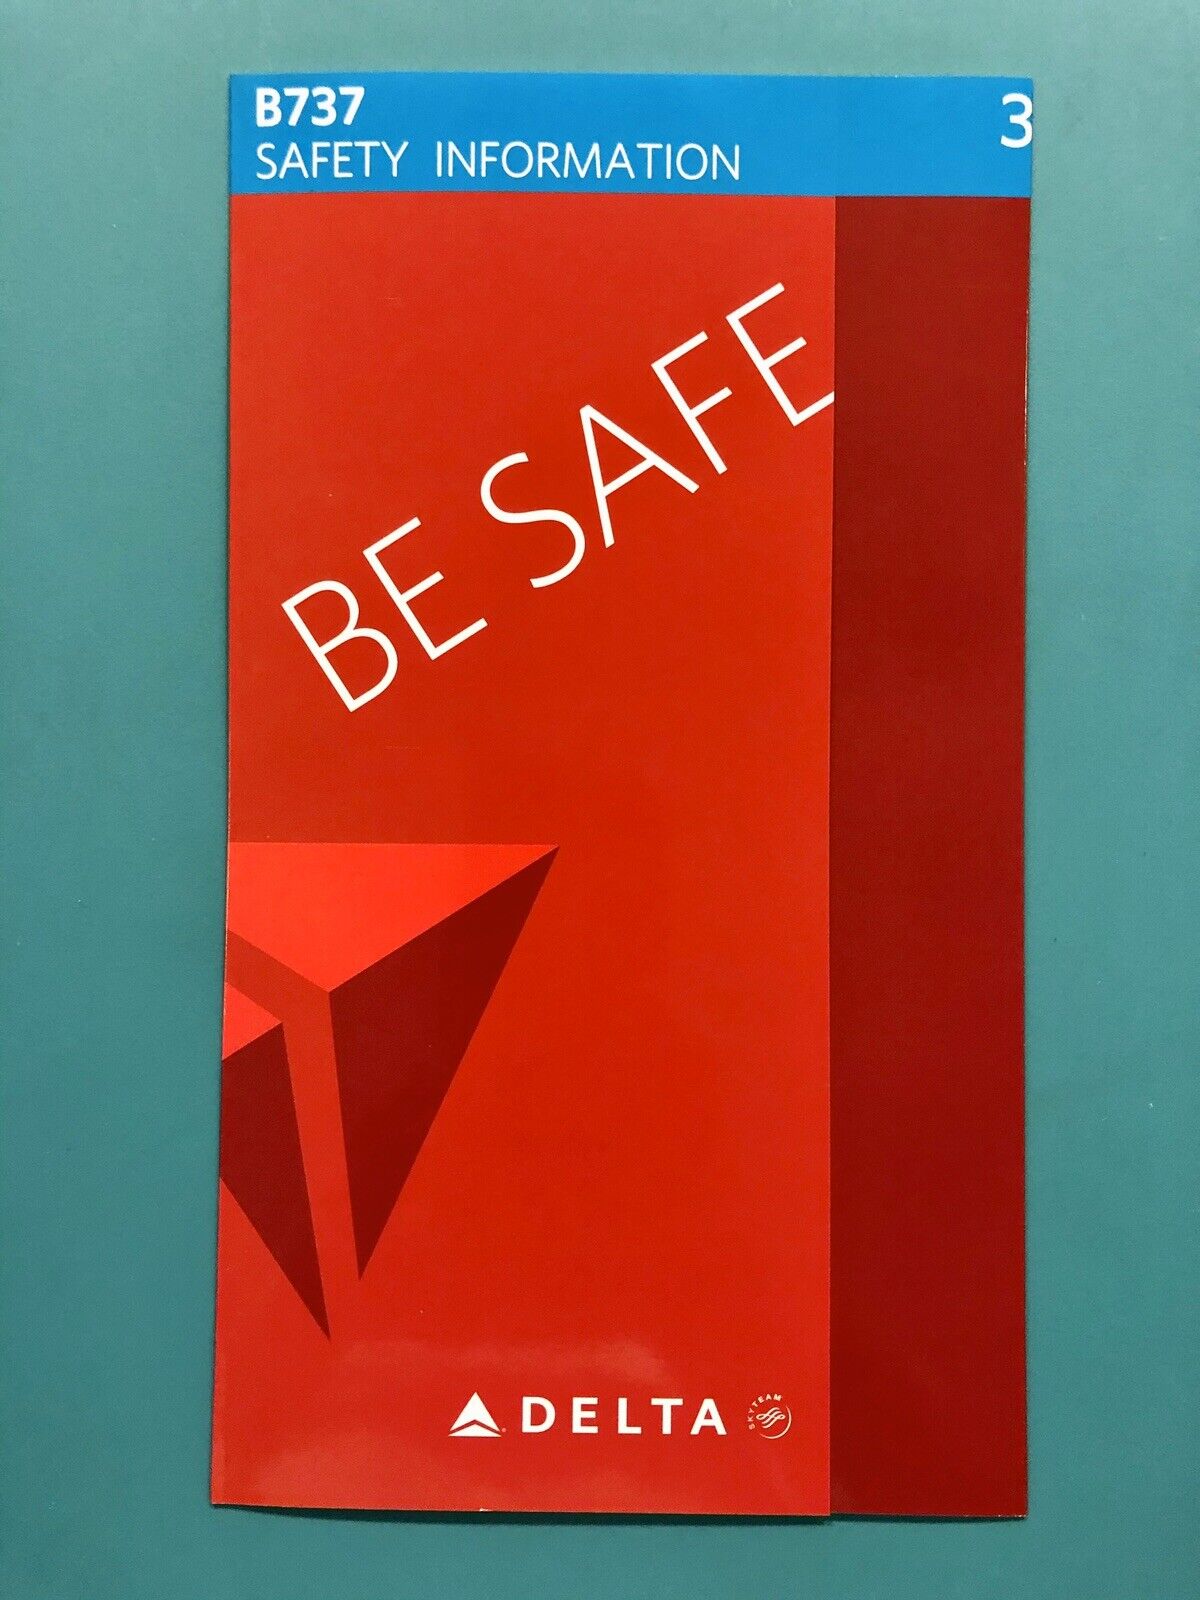 DELTA AIRLINES SAFETY CARD--737